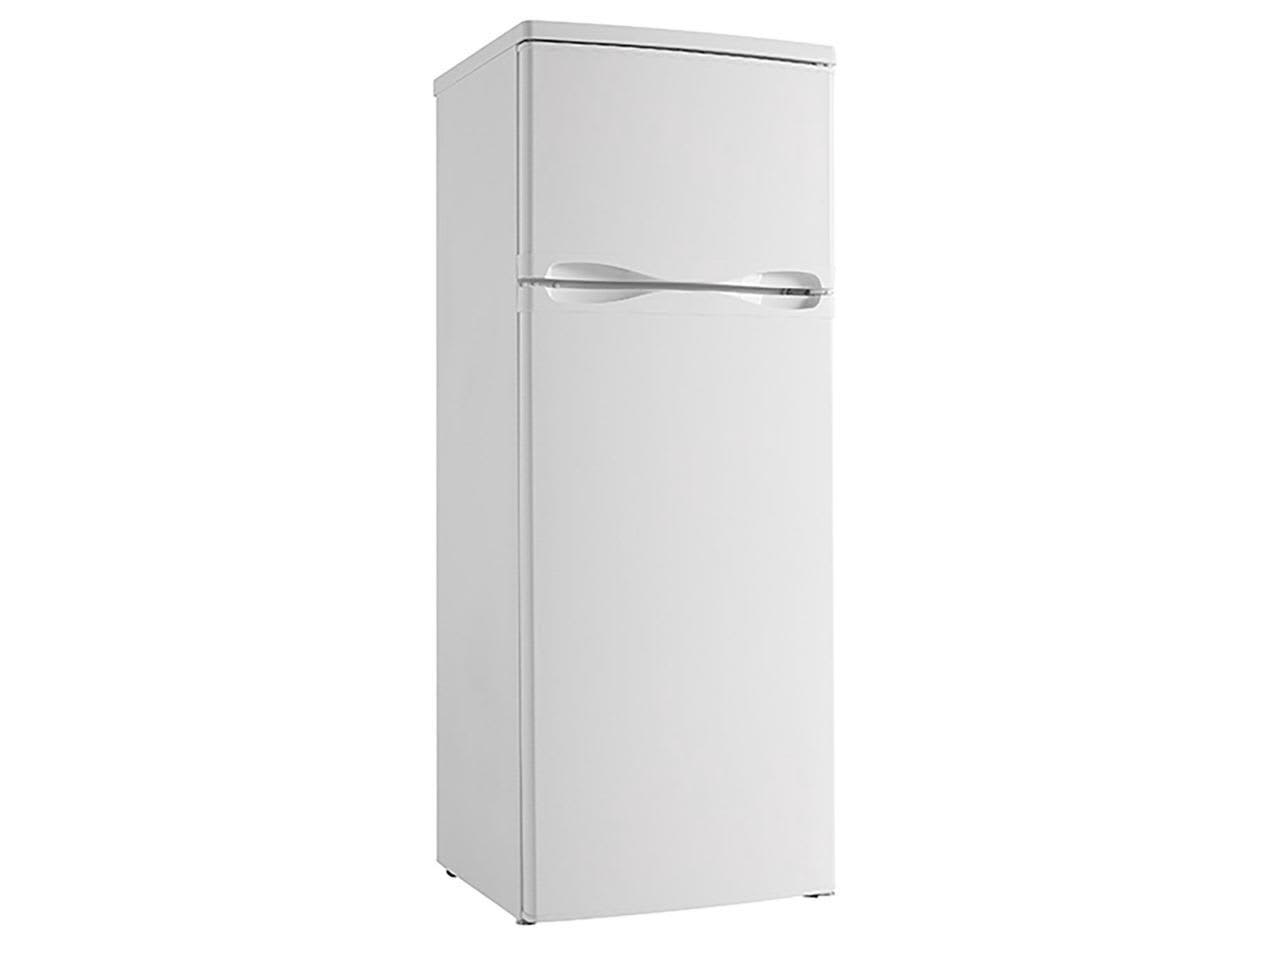  RCA RFR725 2 Door Apartment Size Refrigerator with Freezer,  Stainless,7.5 cu ft : Everything Else